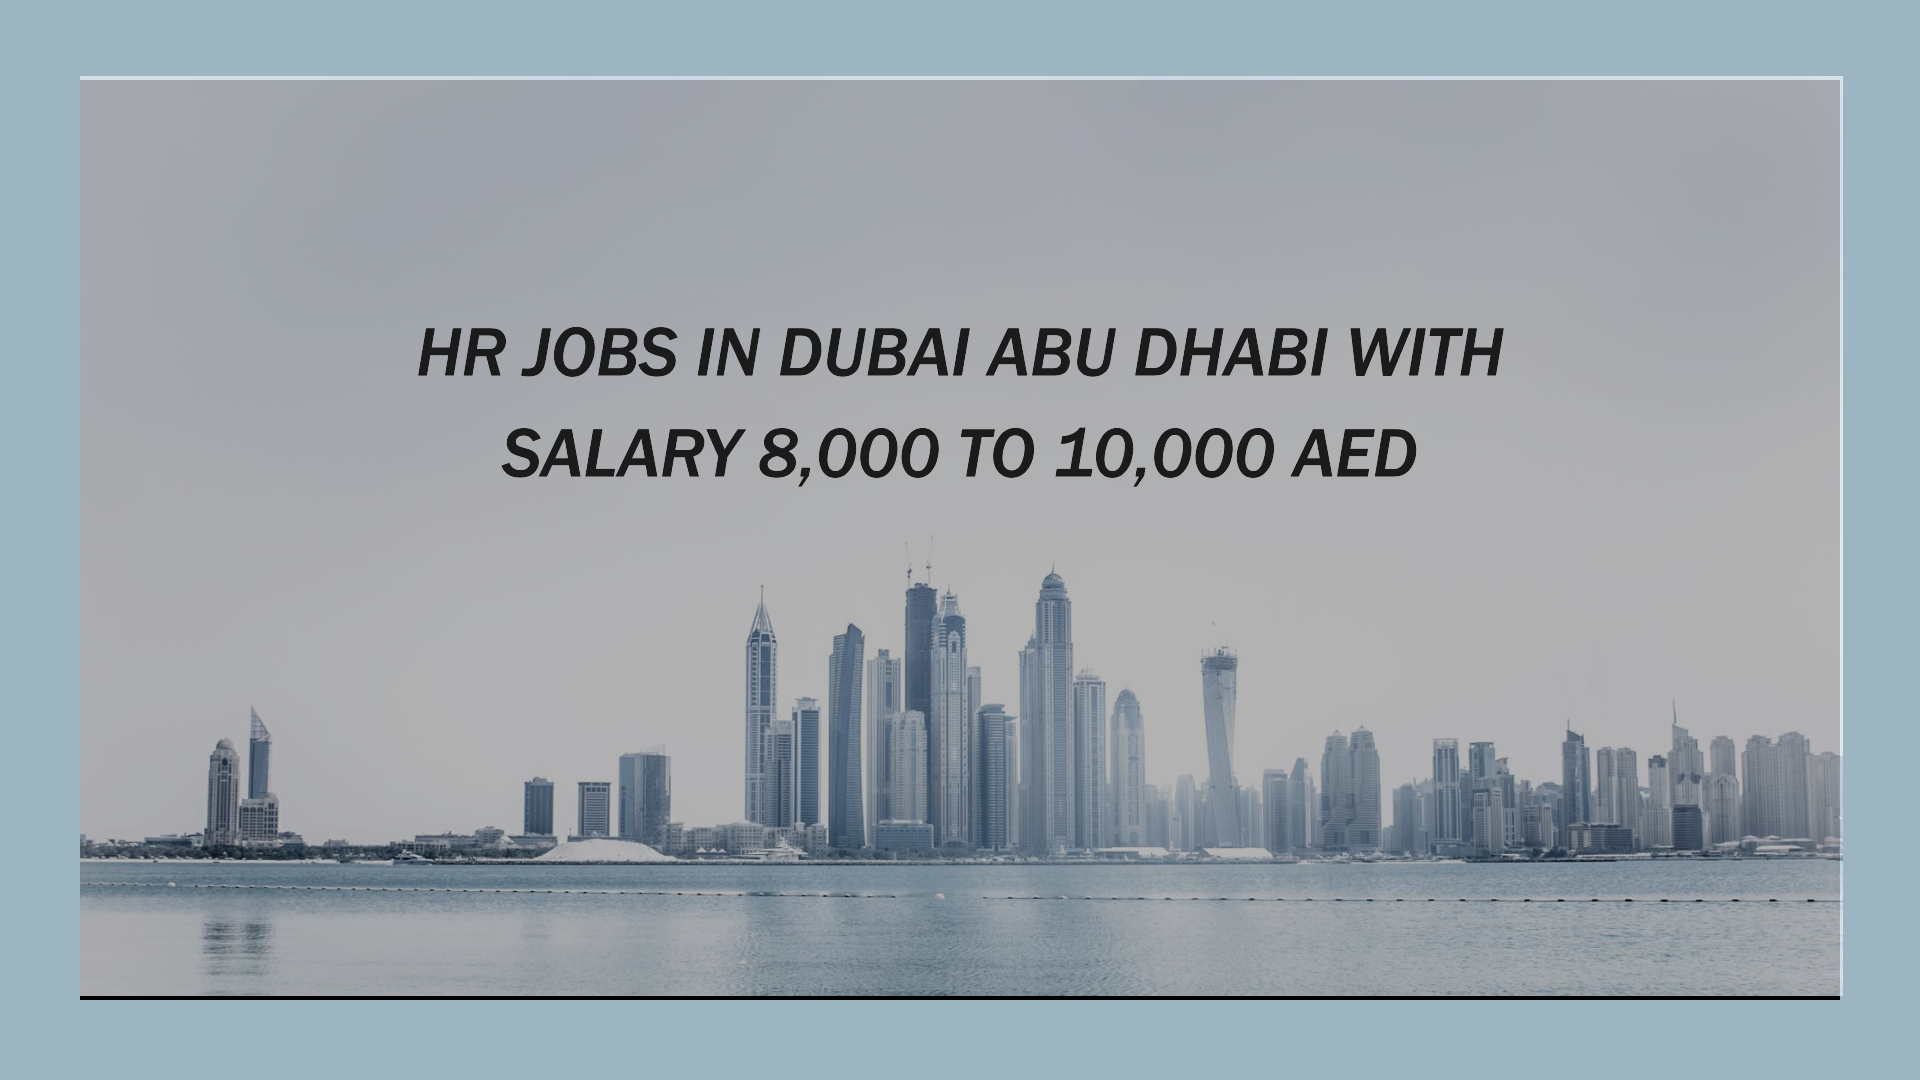 hr jobs in dubai abu dhabi with salary 8,000 to 10,000 AED